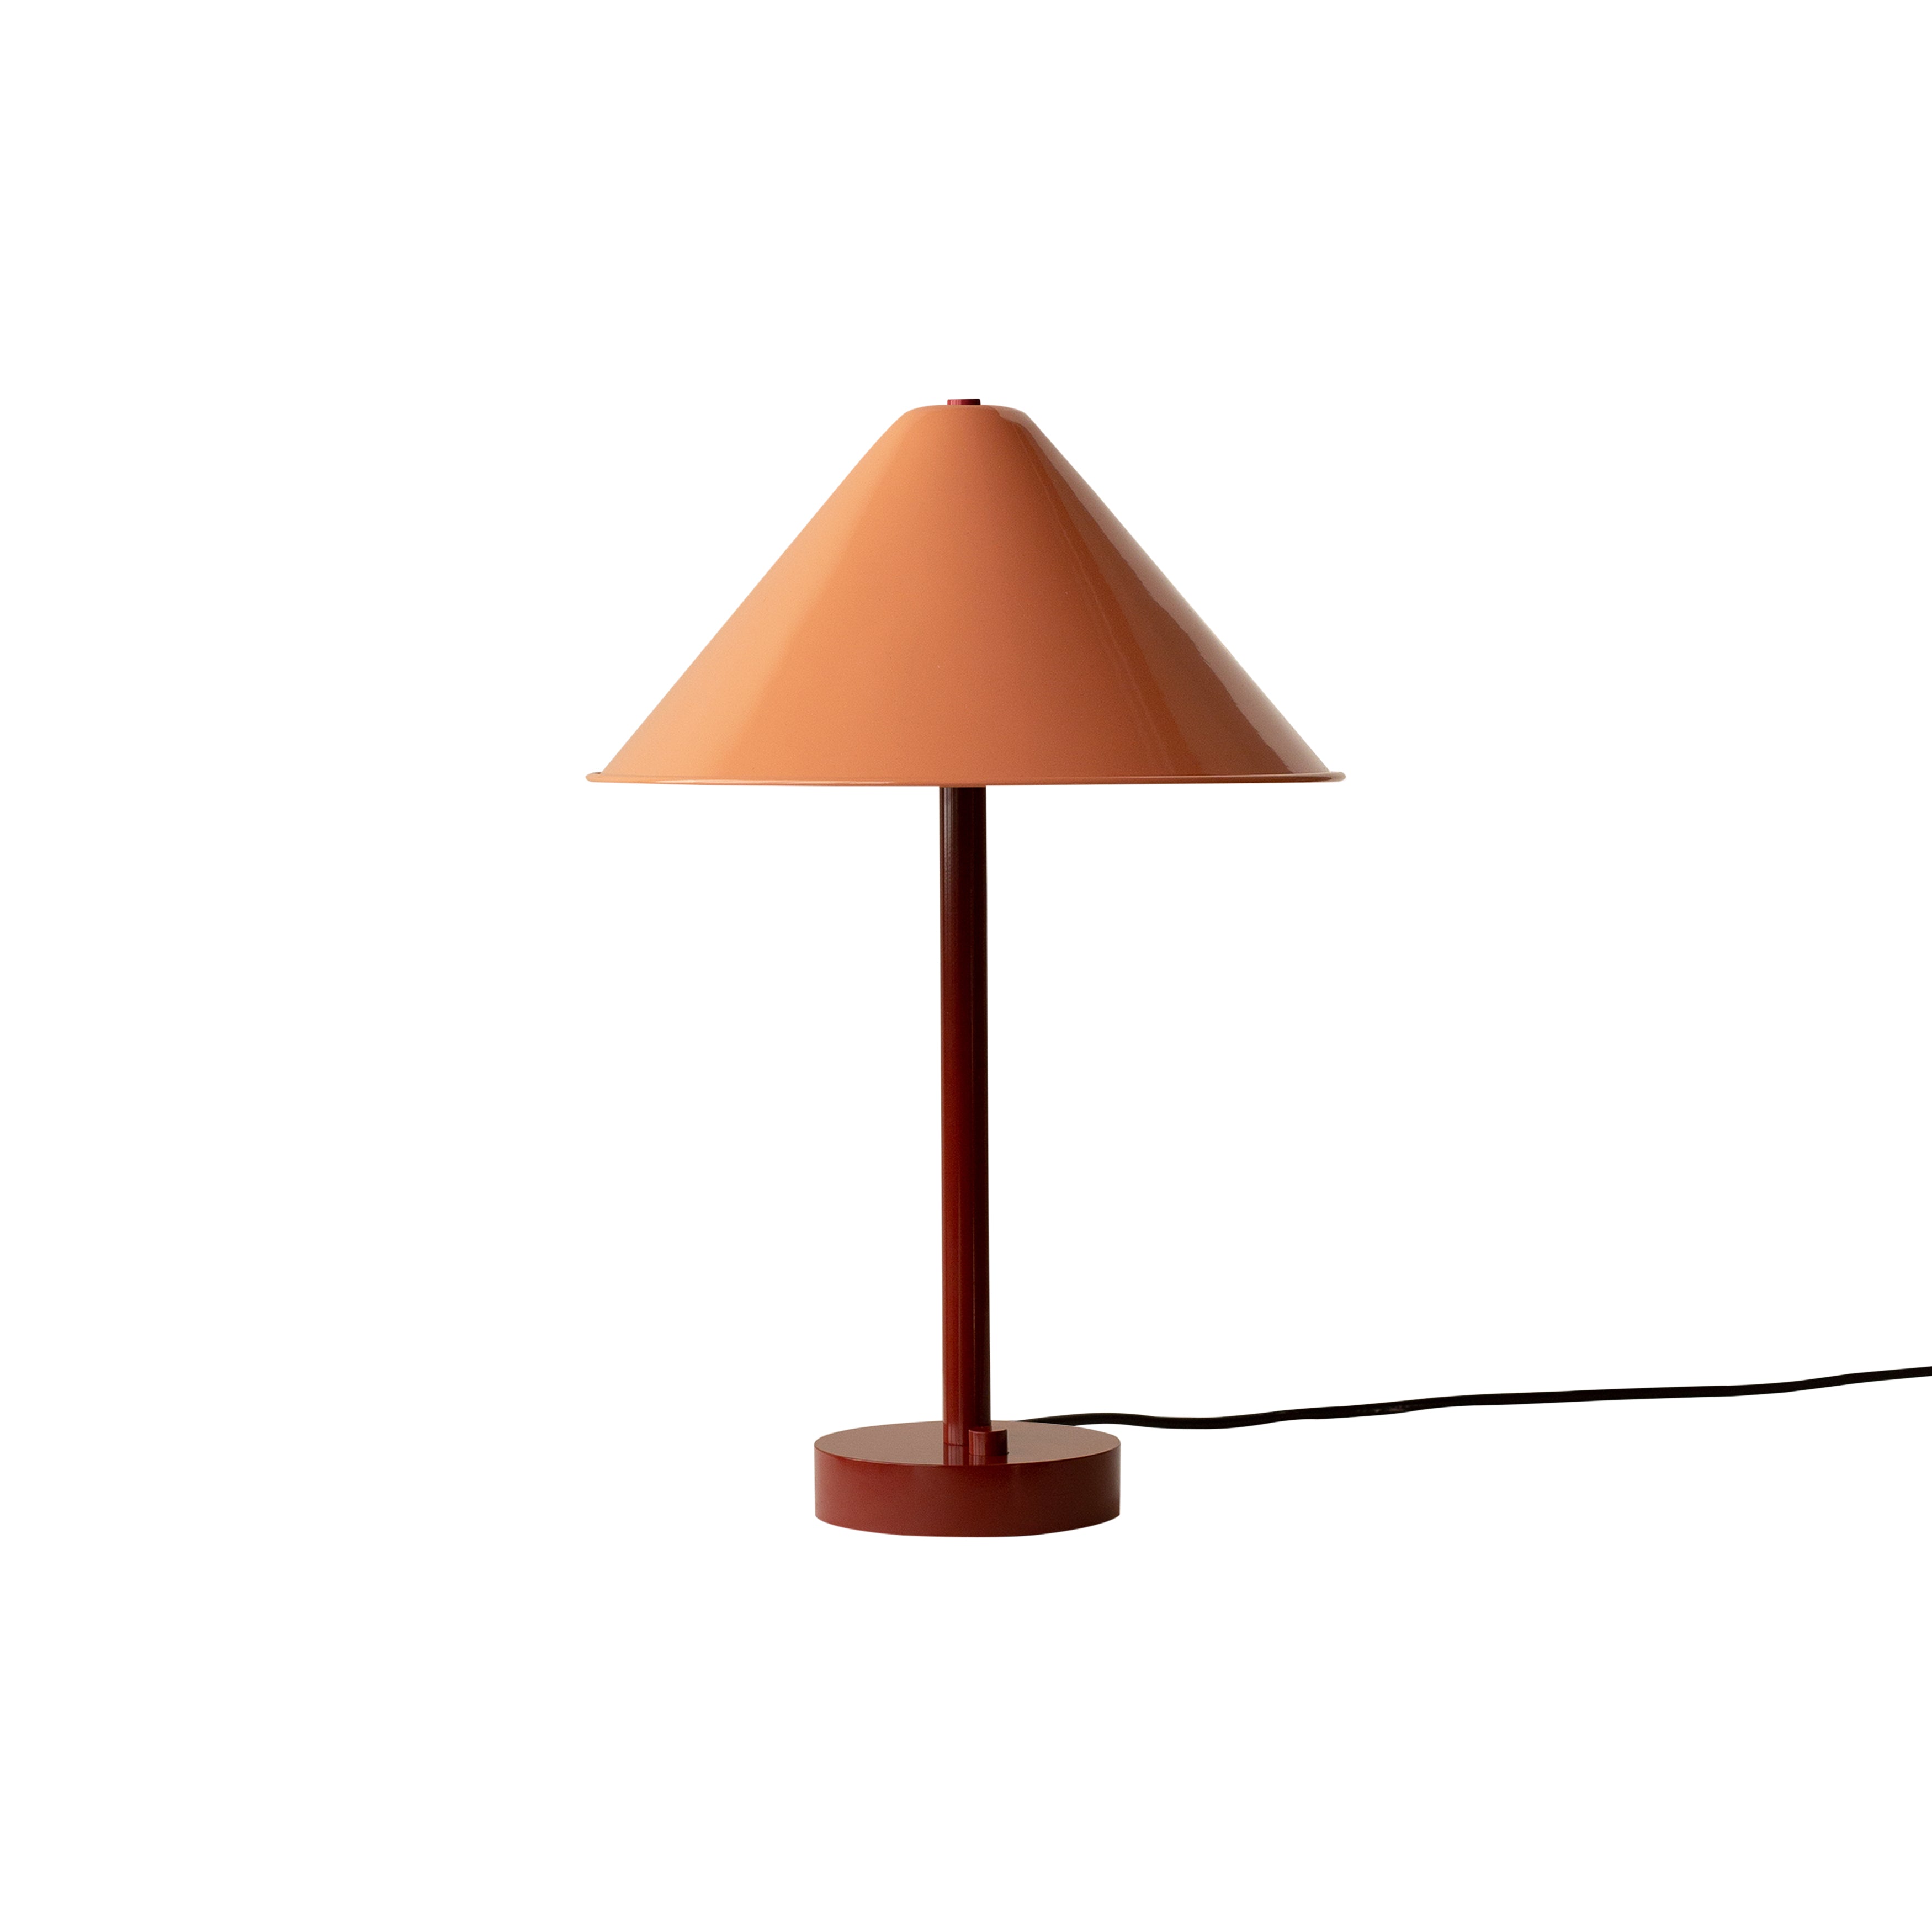 Eave Table Lamp: Peach + Oxide Red